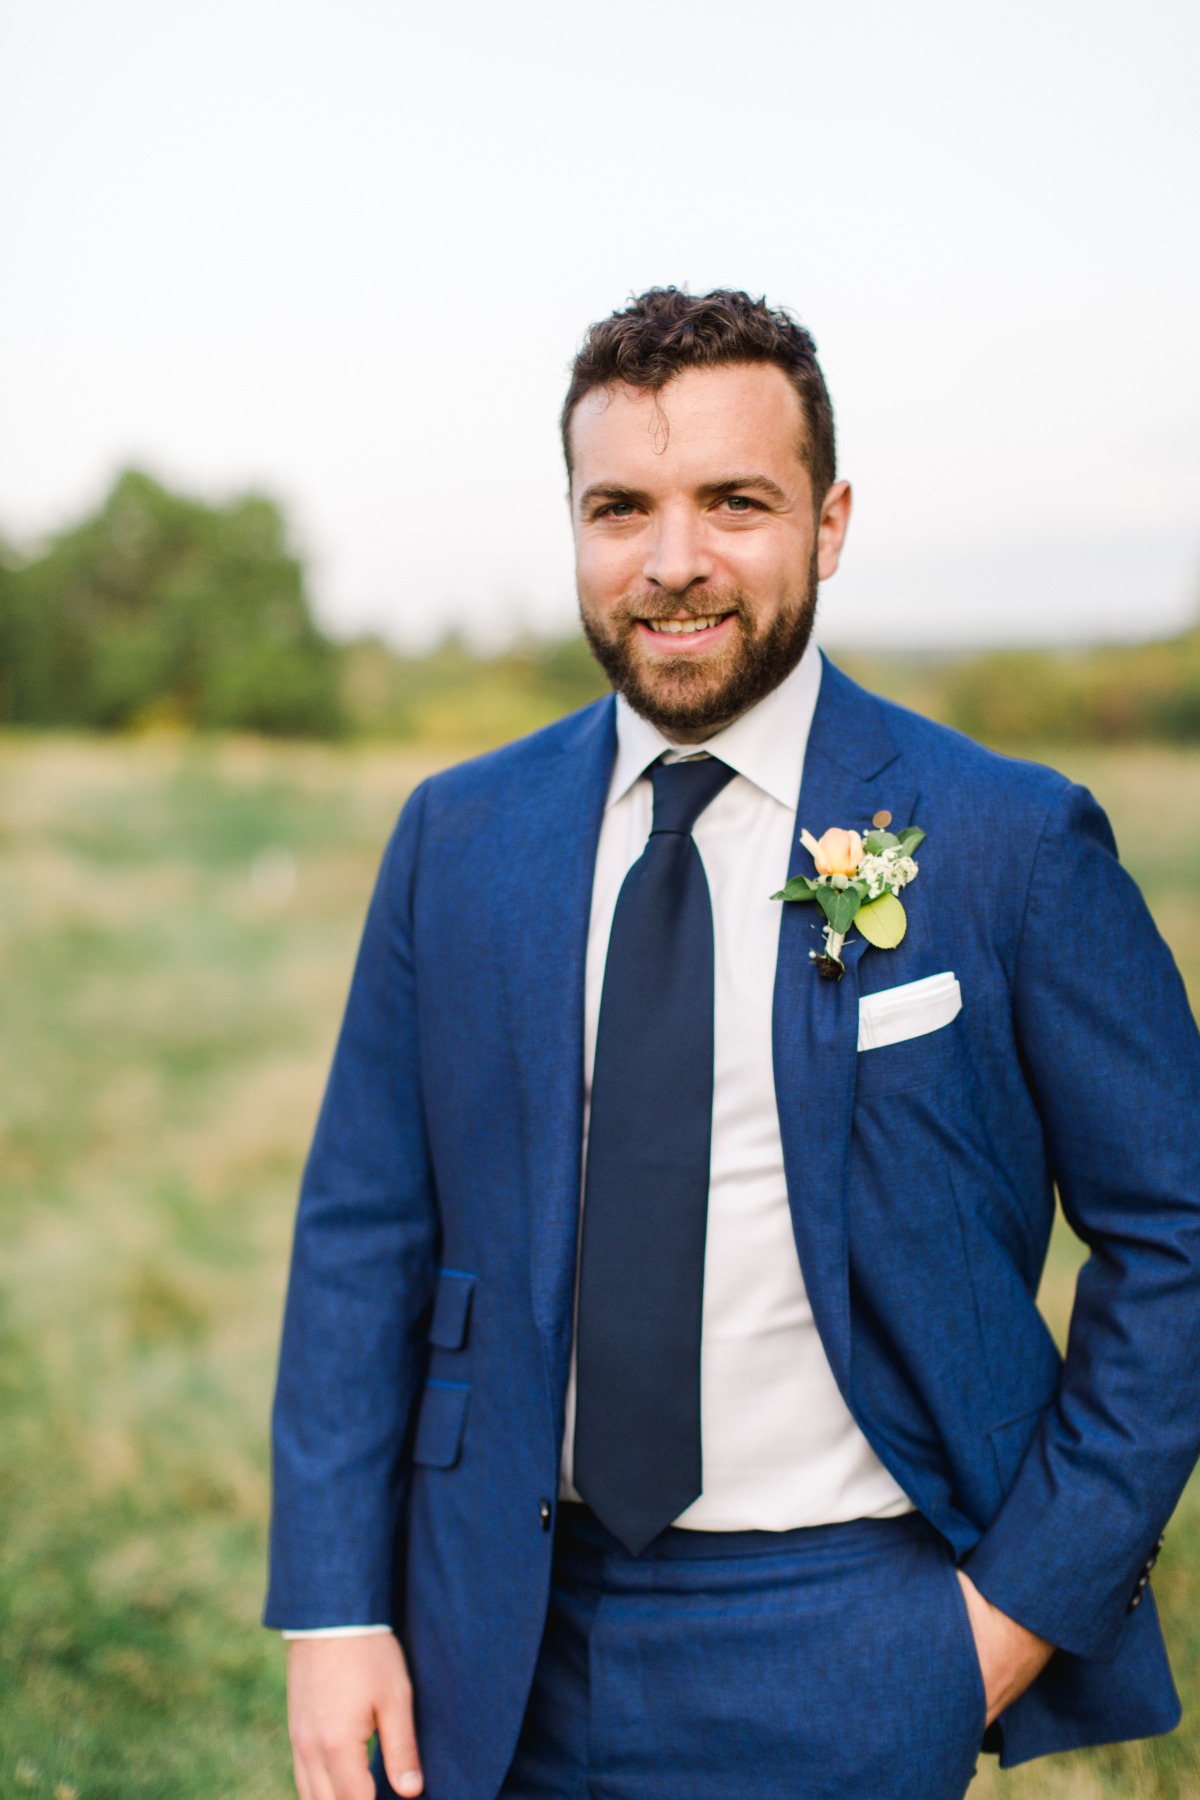 Portrait of groom in bright blue suit with boutonniere